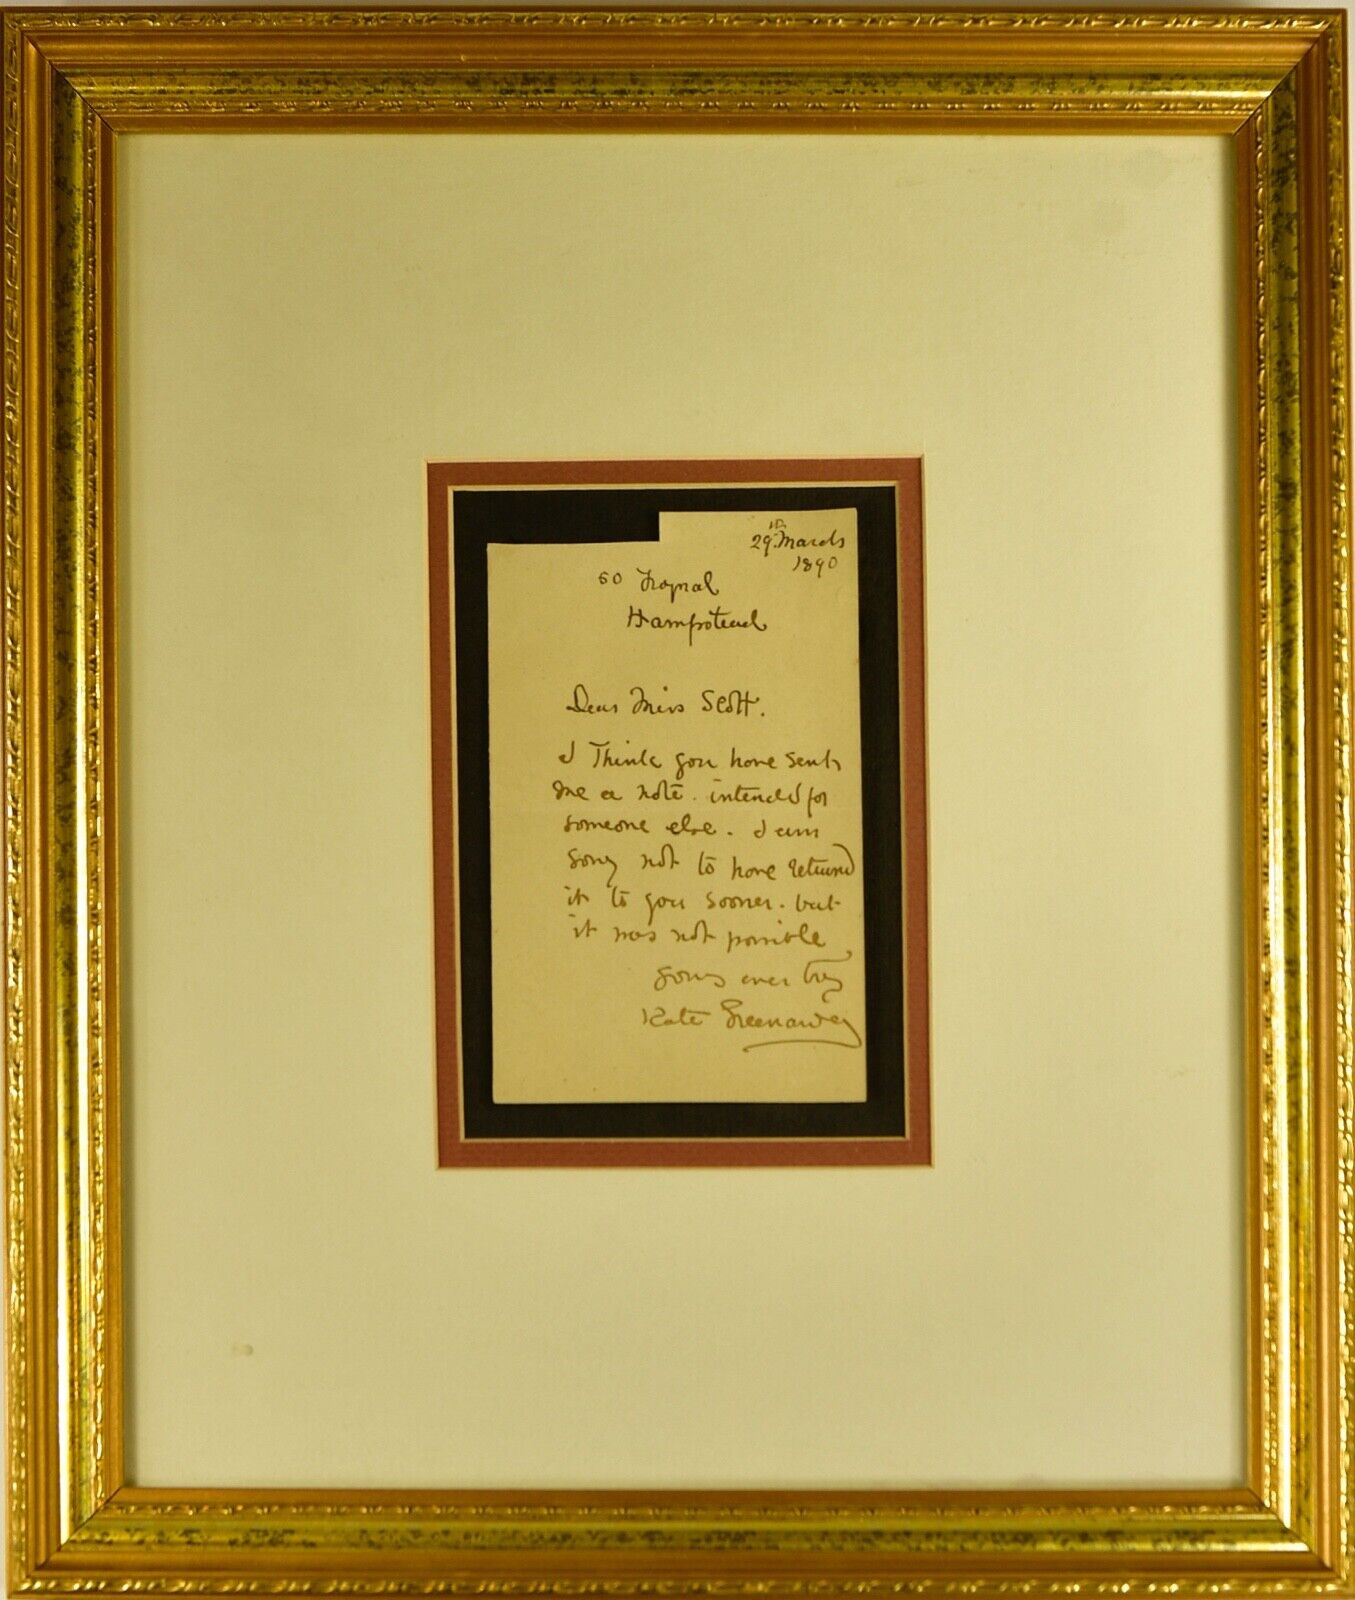 Famous artist Kate Greenaway. Framed 1890 signed autograph letter. Reduced $400